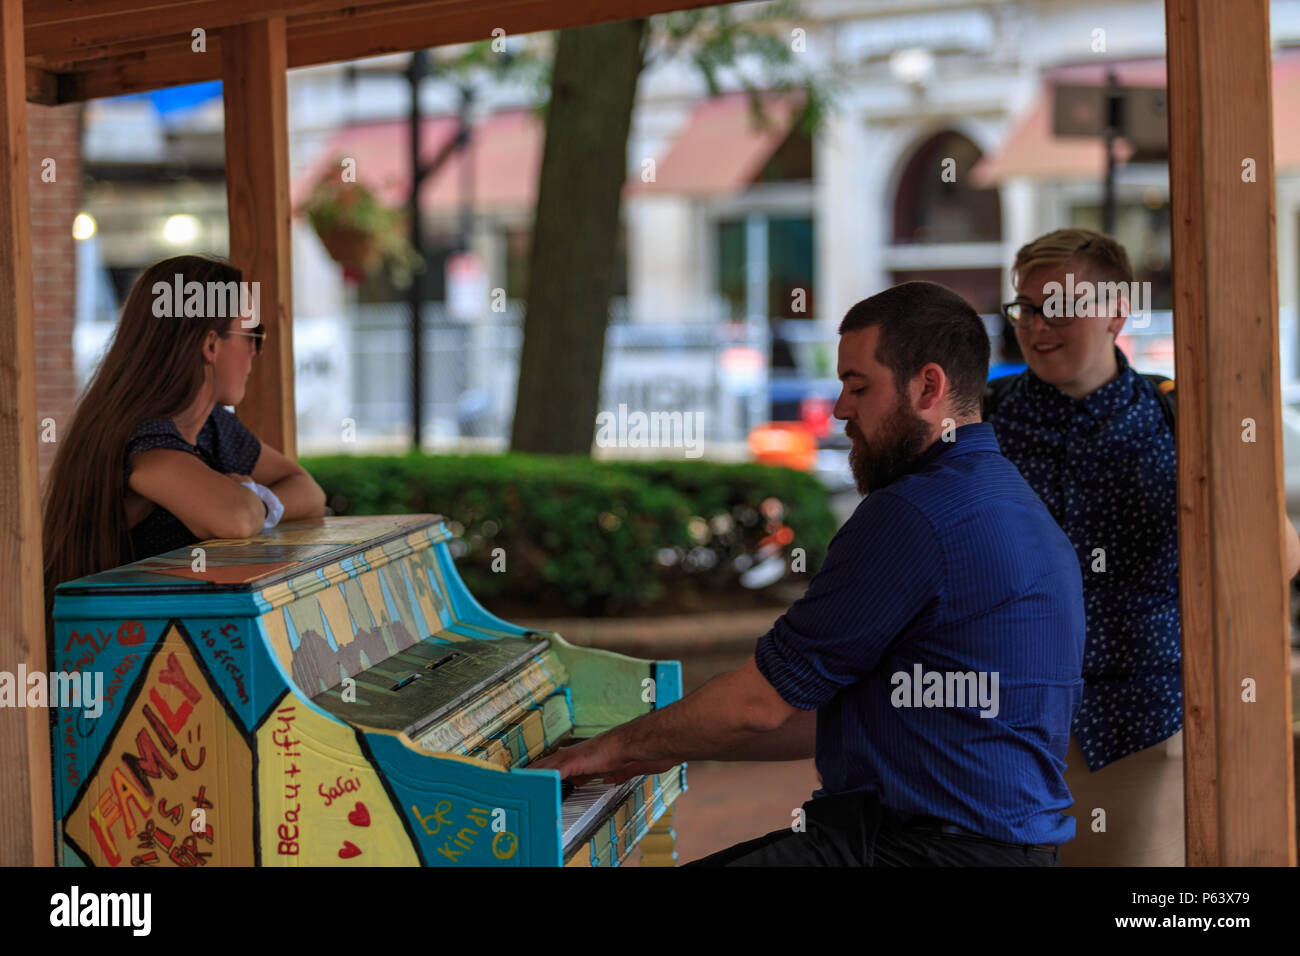 Lancaster, PA, USA - June 25, 2018: In downtown Lancaster City, colorful pianos are played by people passing by, filling the street with impromptu sou Stock Photo